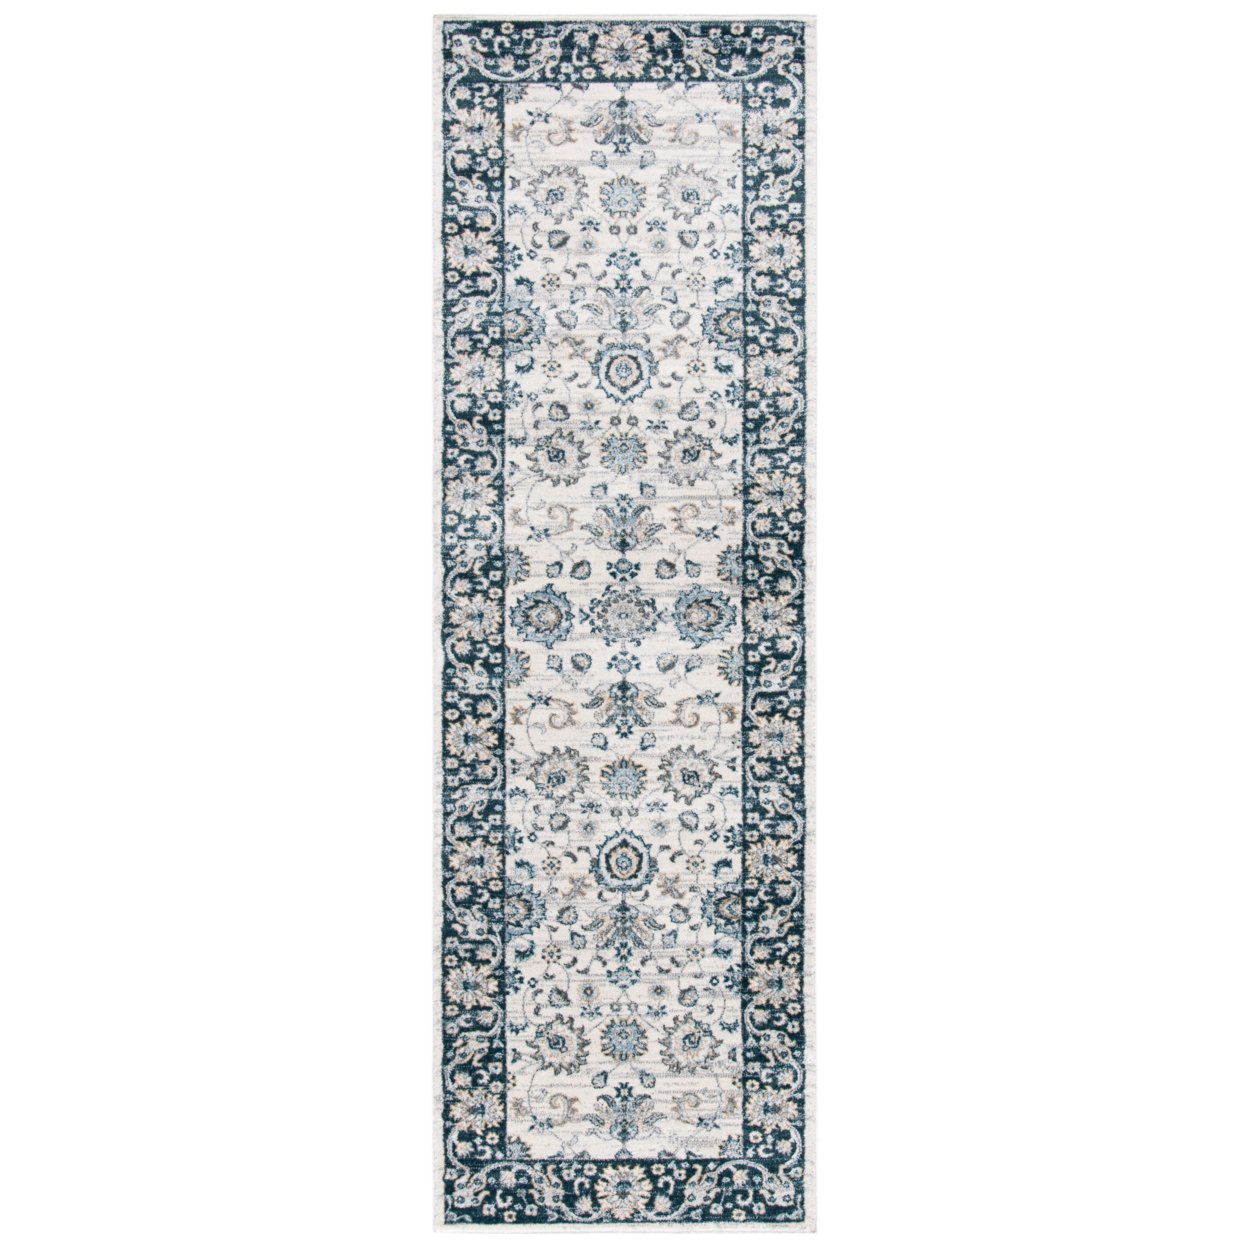 SAFAVIEH Isabella Collection ISA940A Cream / Navy Rug - 6-7 X 6-7 Square